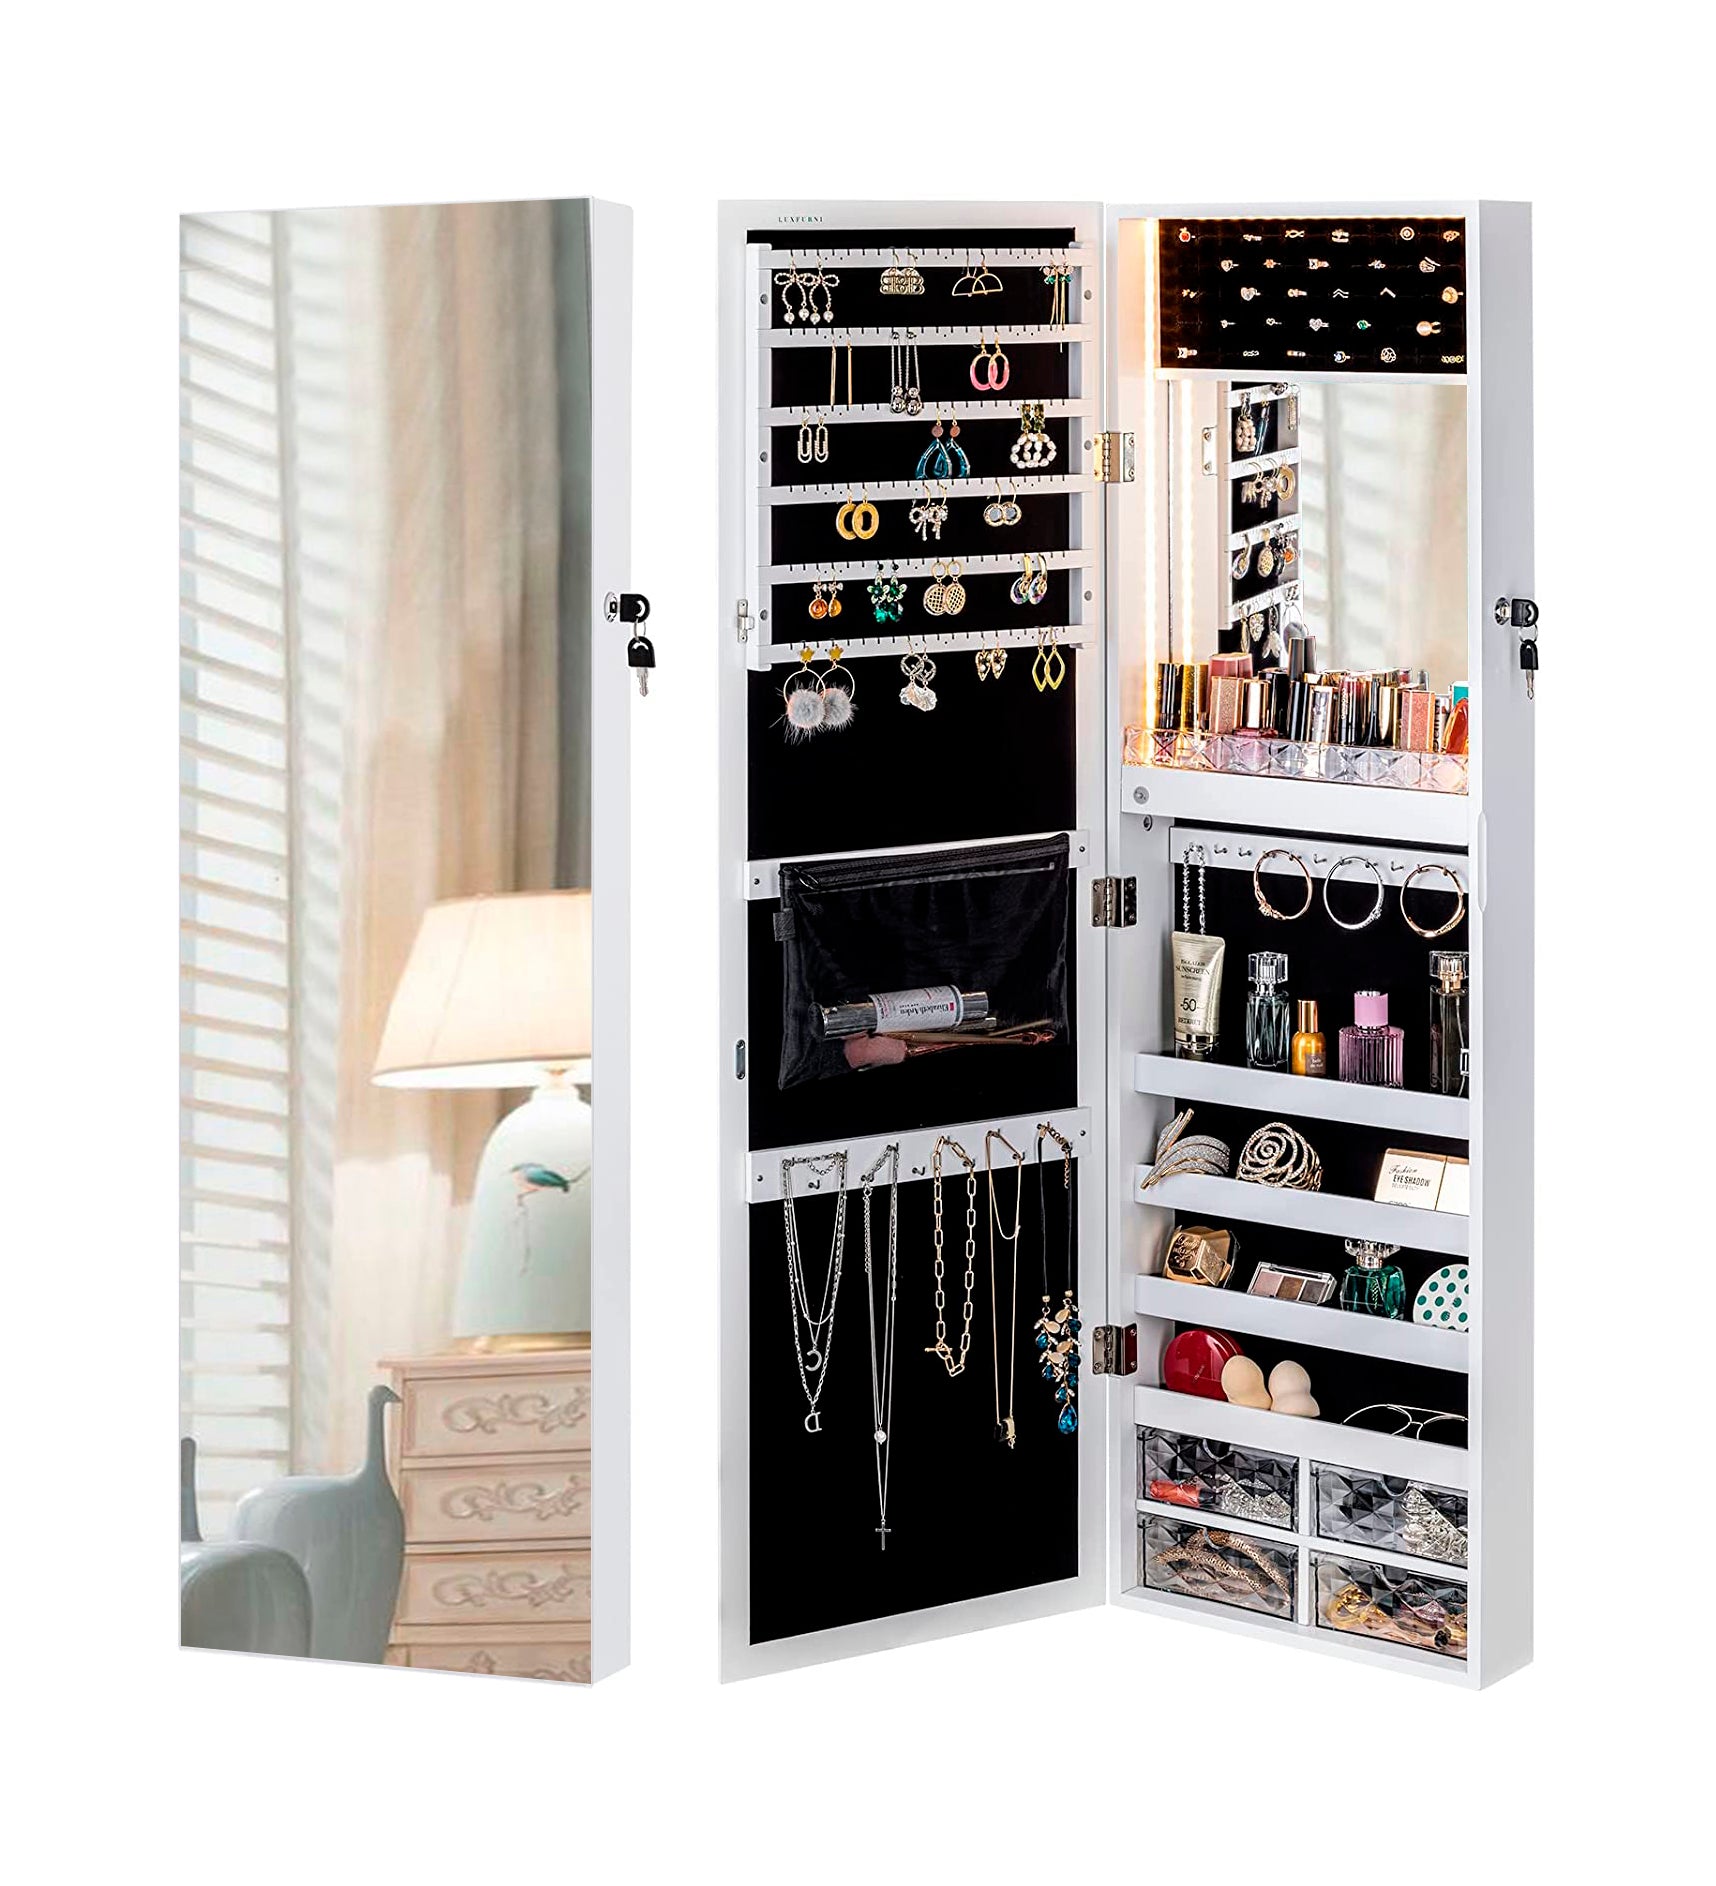 Luxfurni | Jewelry Armoire | Wall Mounted Stella 9 Jewelry Armoire with Built-in LED Light - White